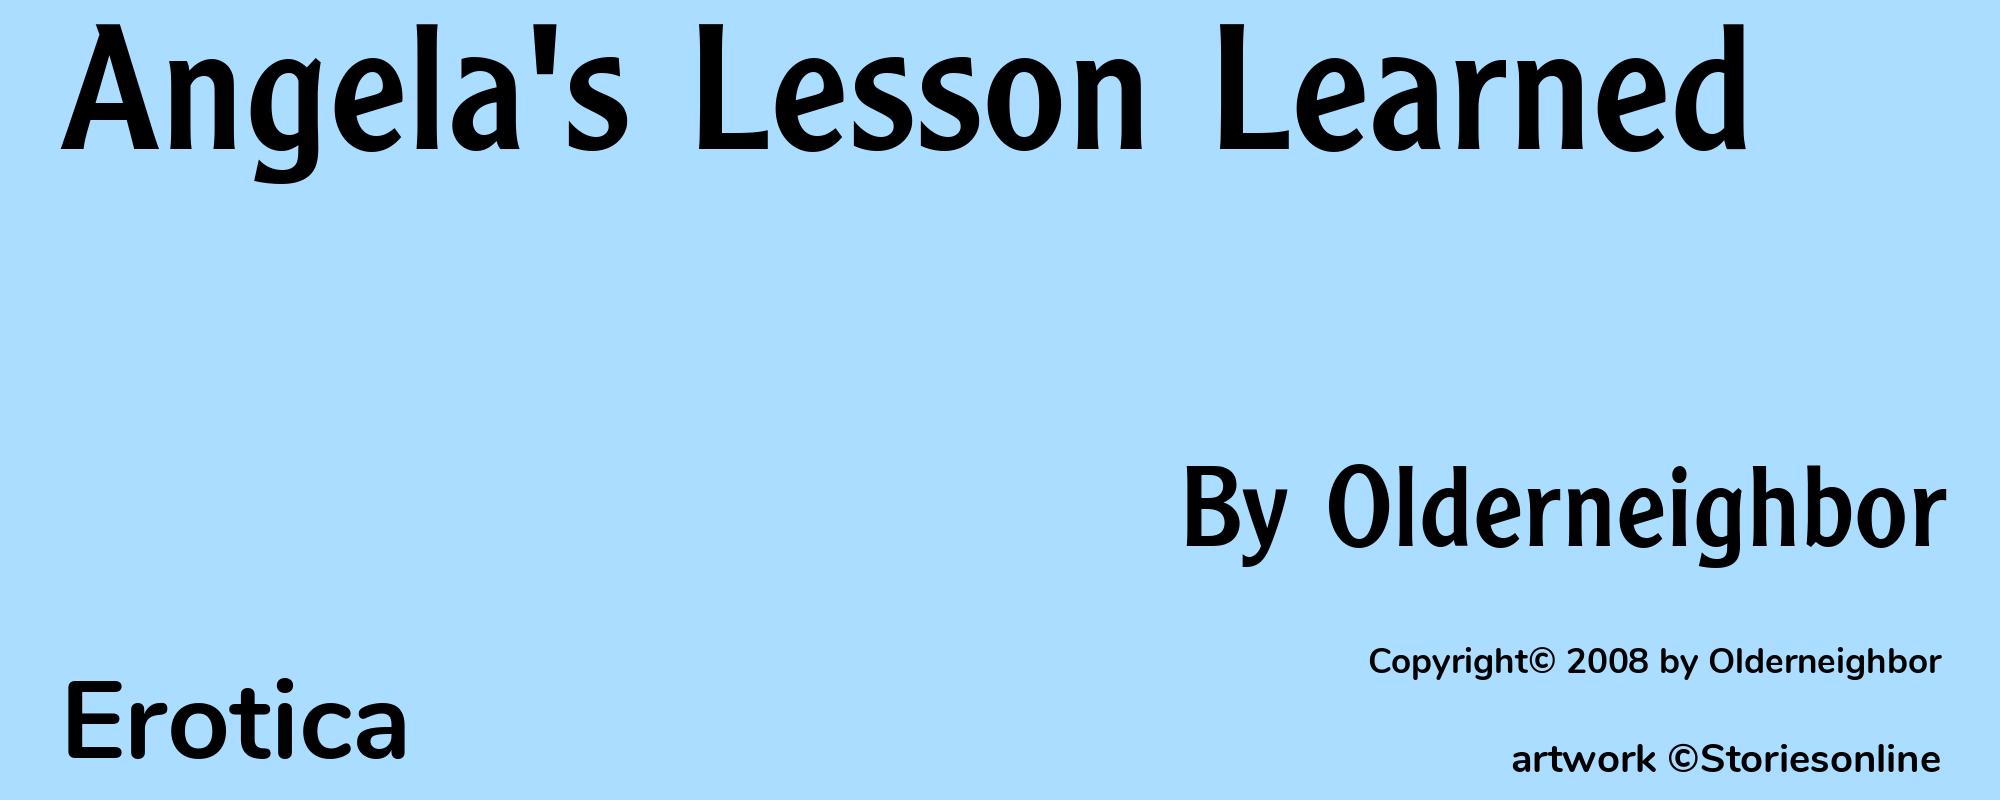 Angela's Lesson Learned - Cover